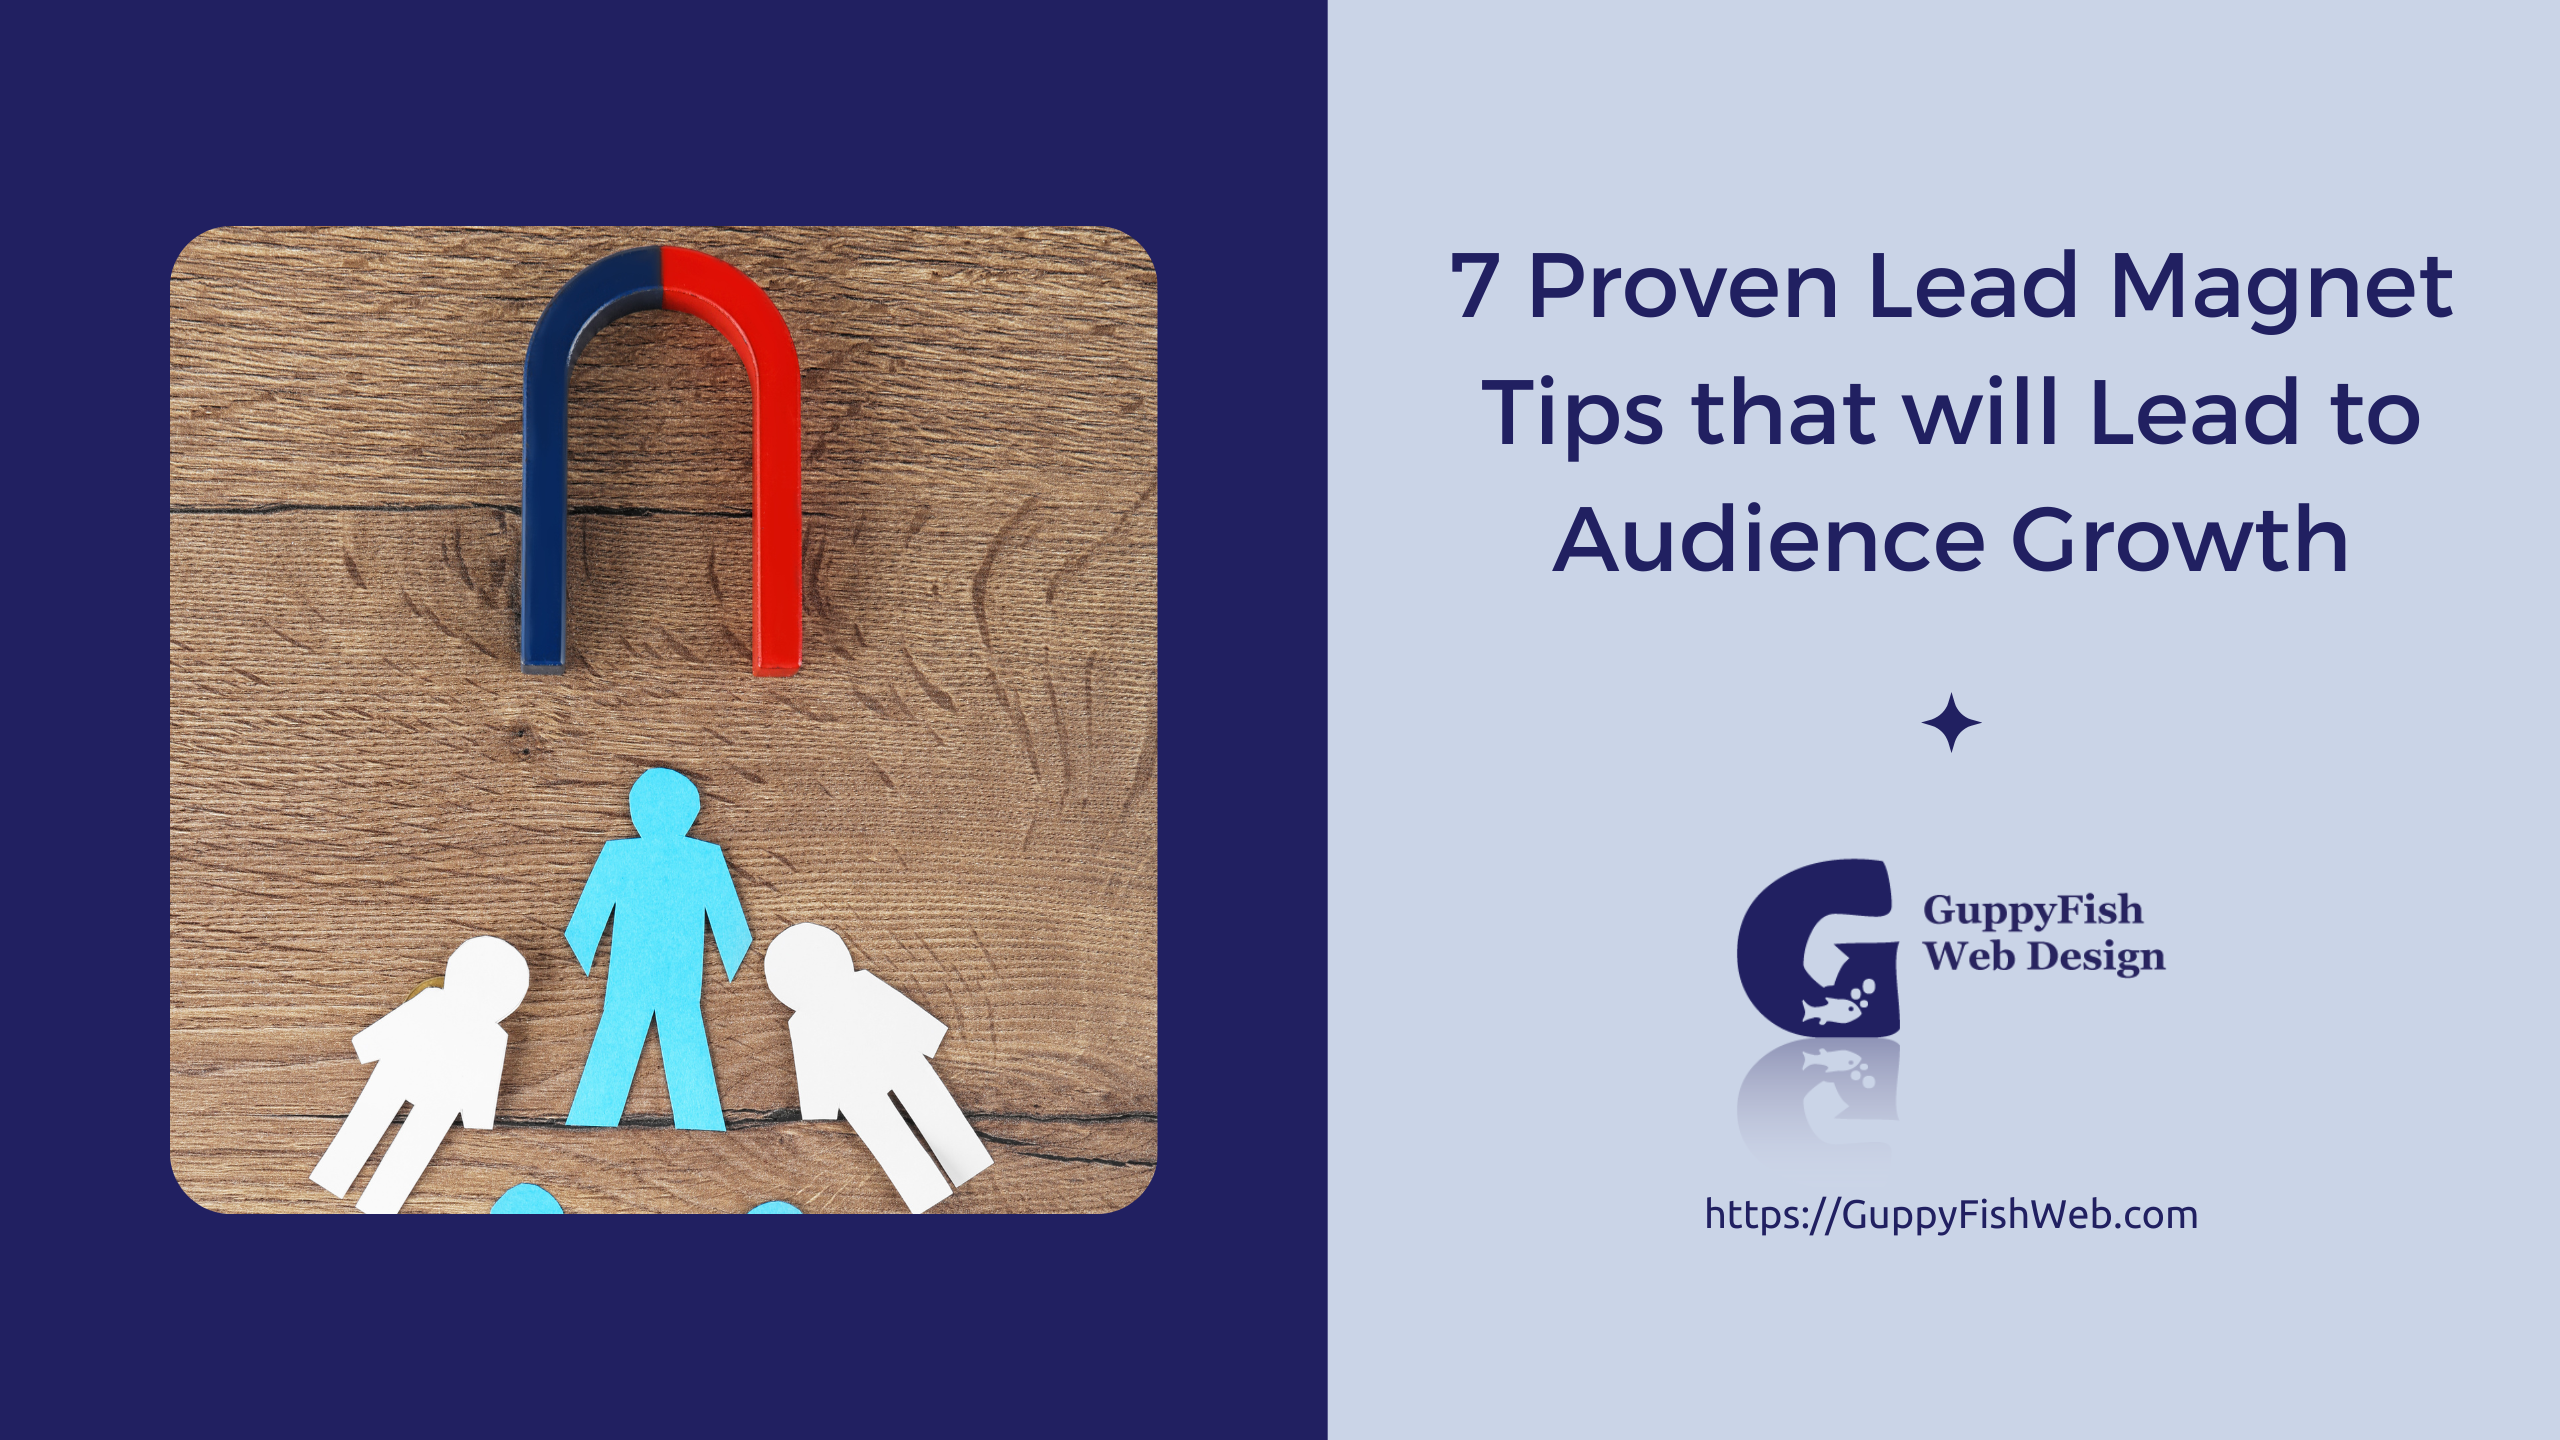 7 Proven Lead Magnet Tips that will Lead to Audience Growth